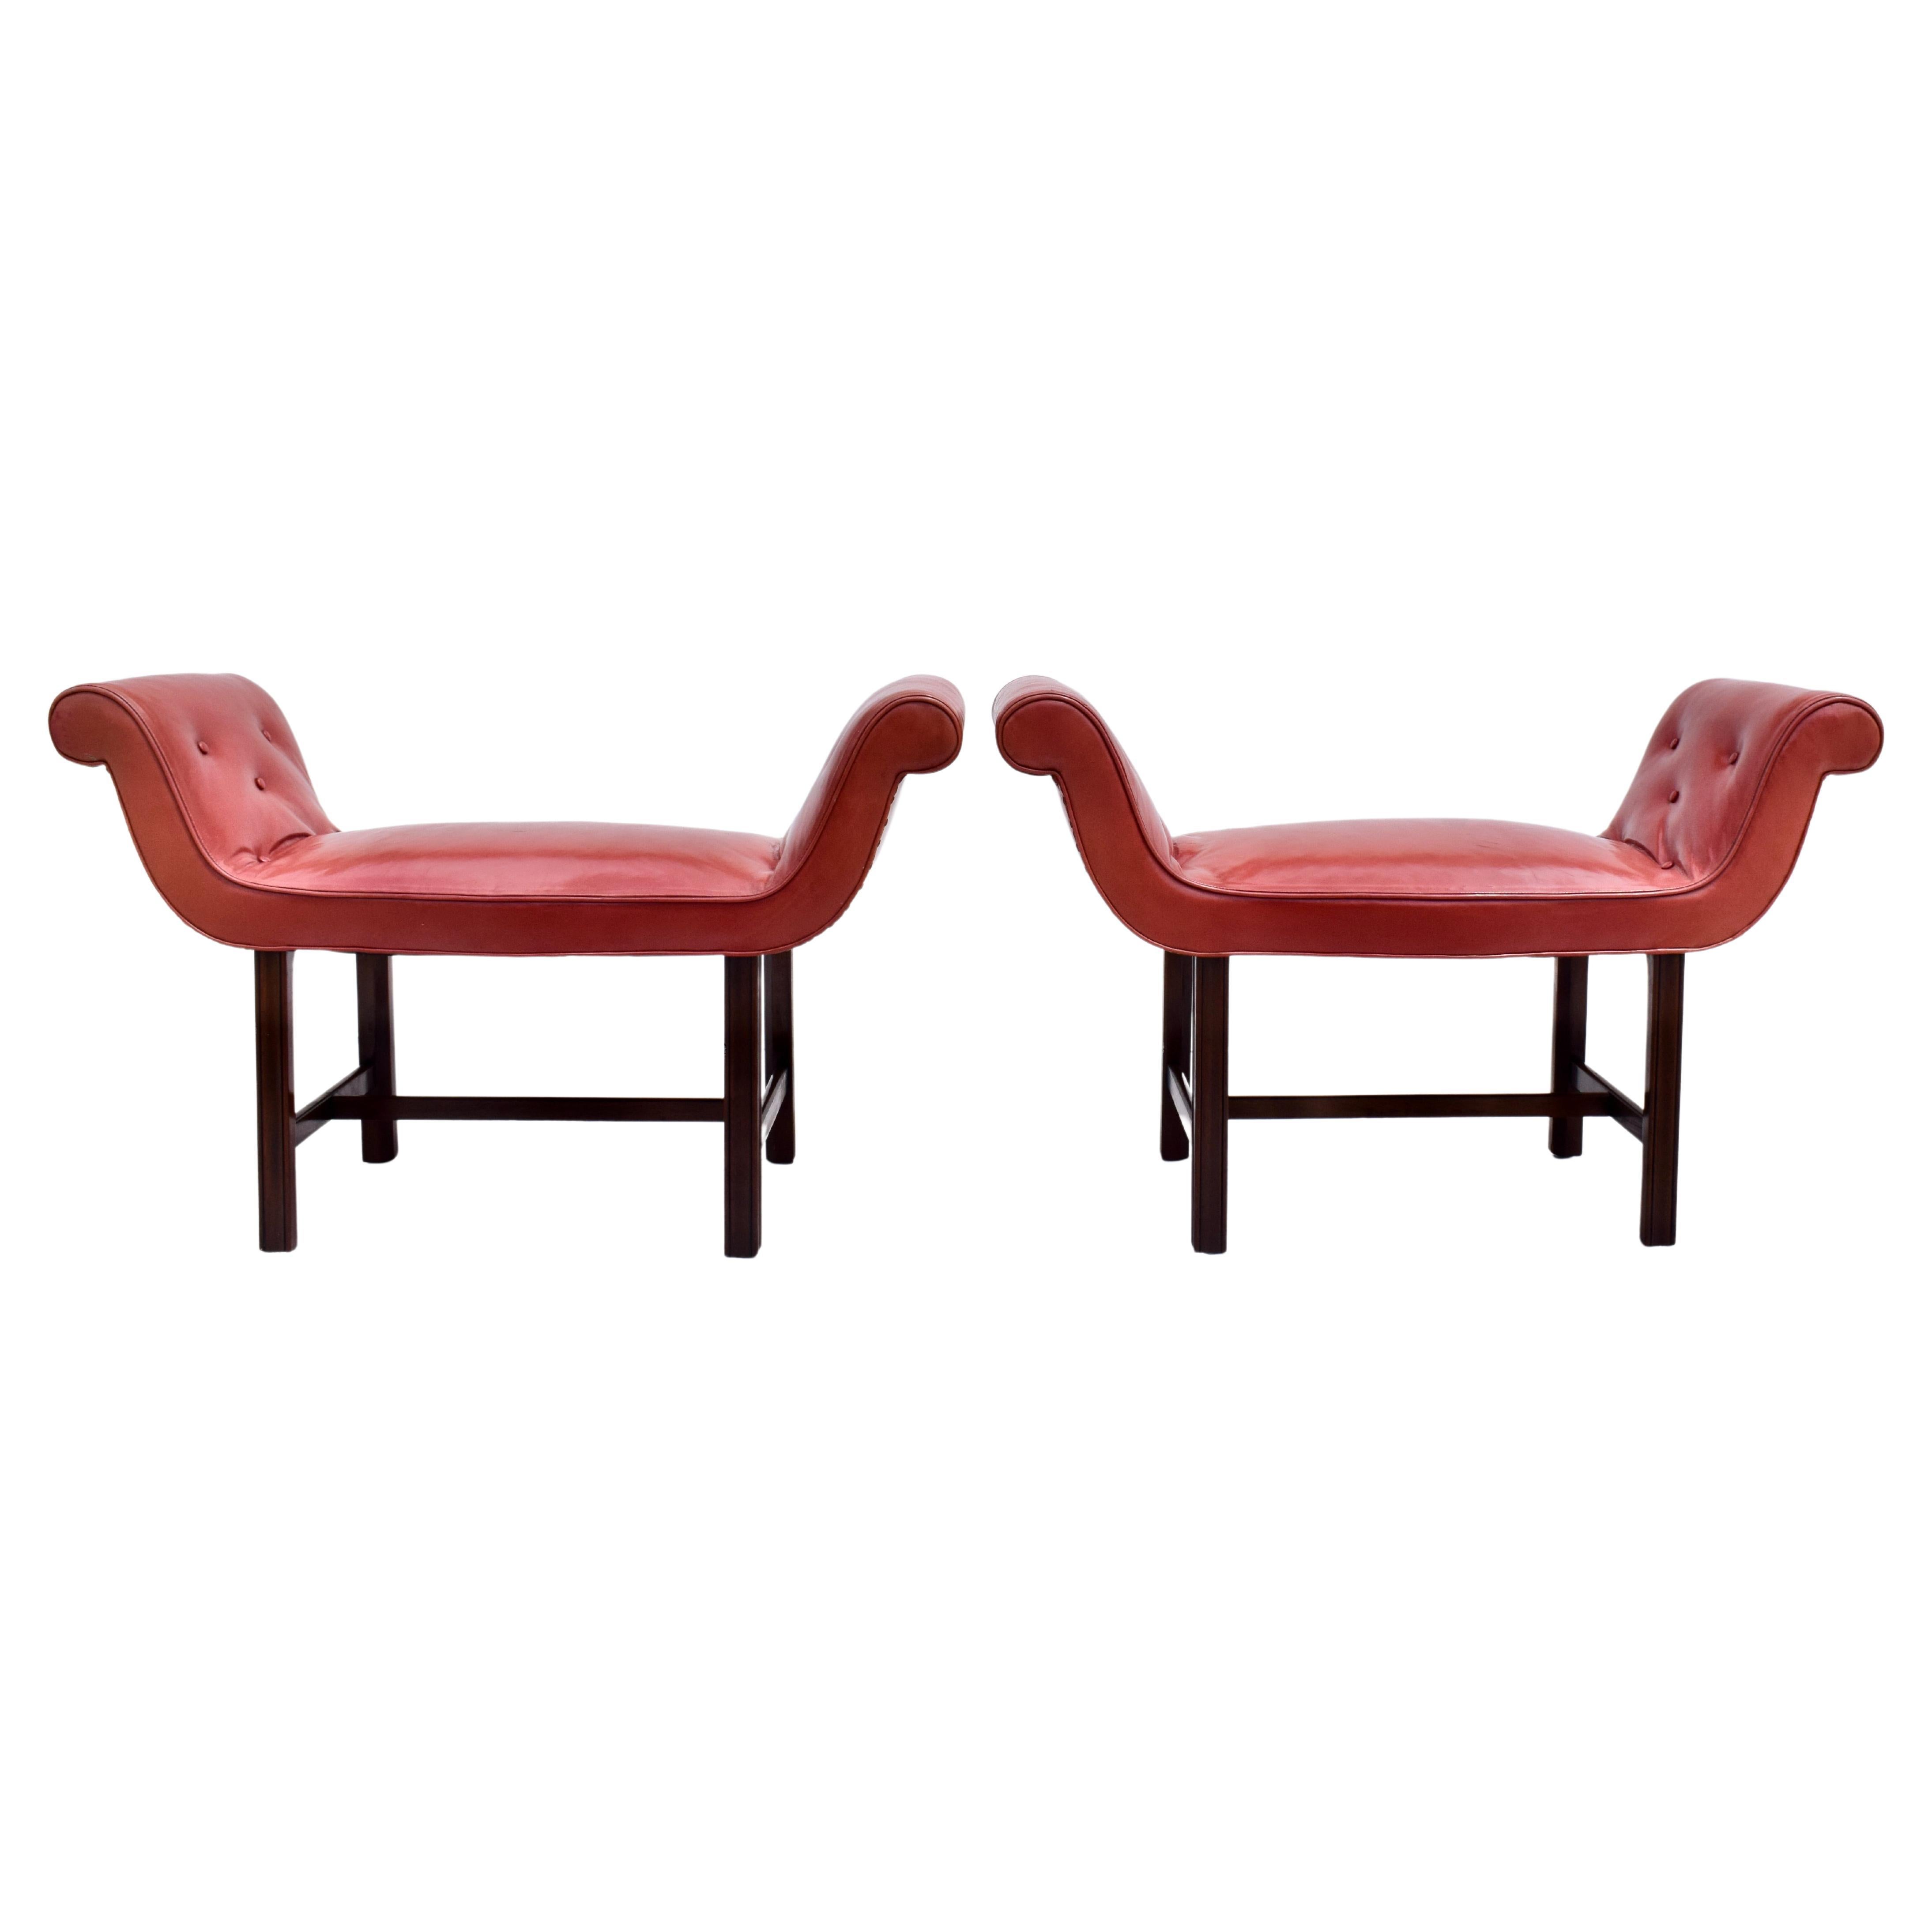 English Leather Saddle Seat Window Benches For Sale